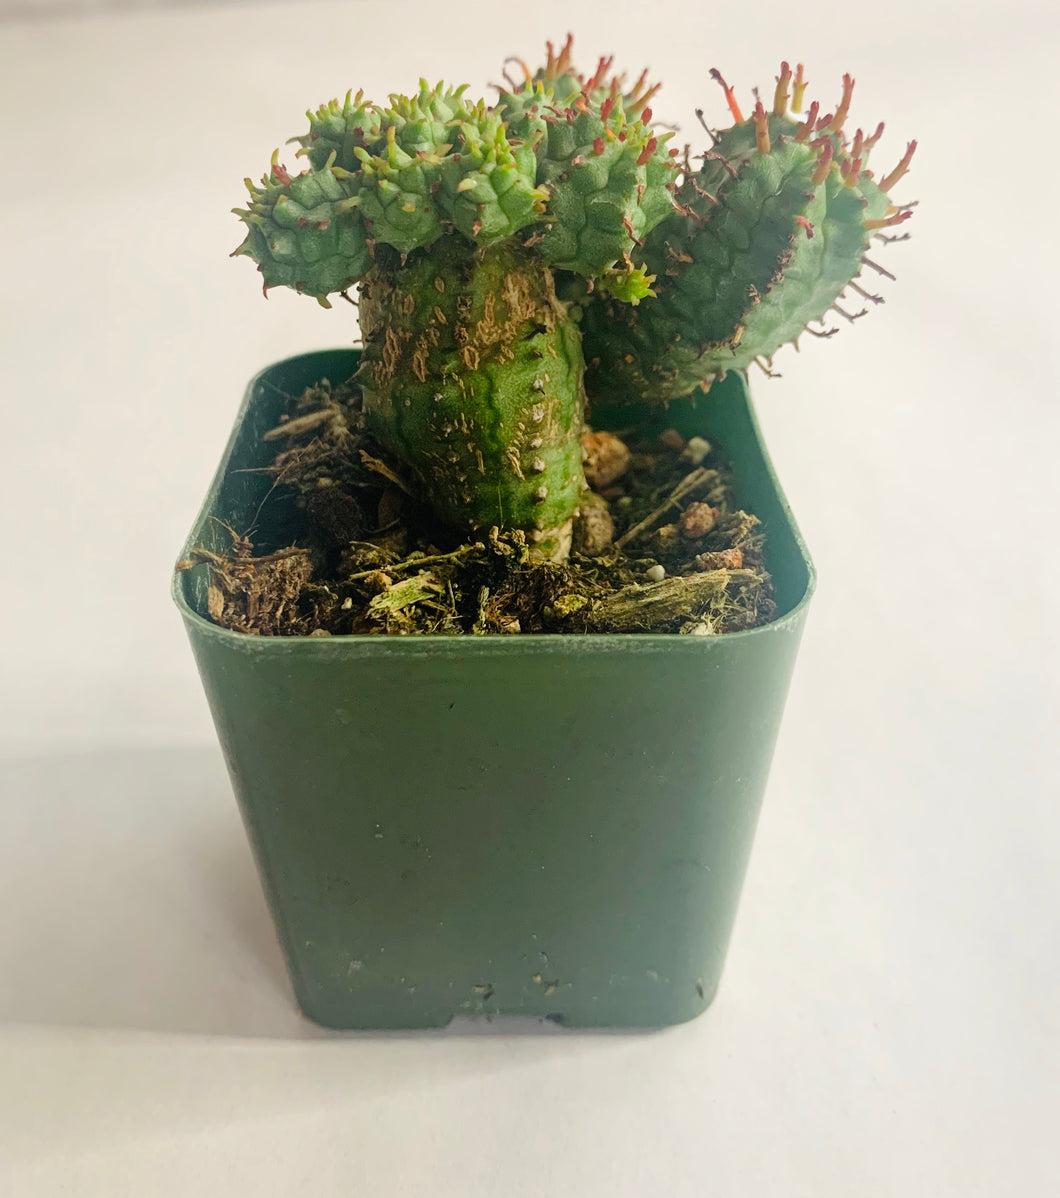 A green cactus-like succulent with small thorns sticking out. The top of the succulent has multiple smaller rounded growths, and some of the thorns are bright red.